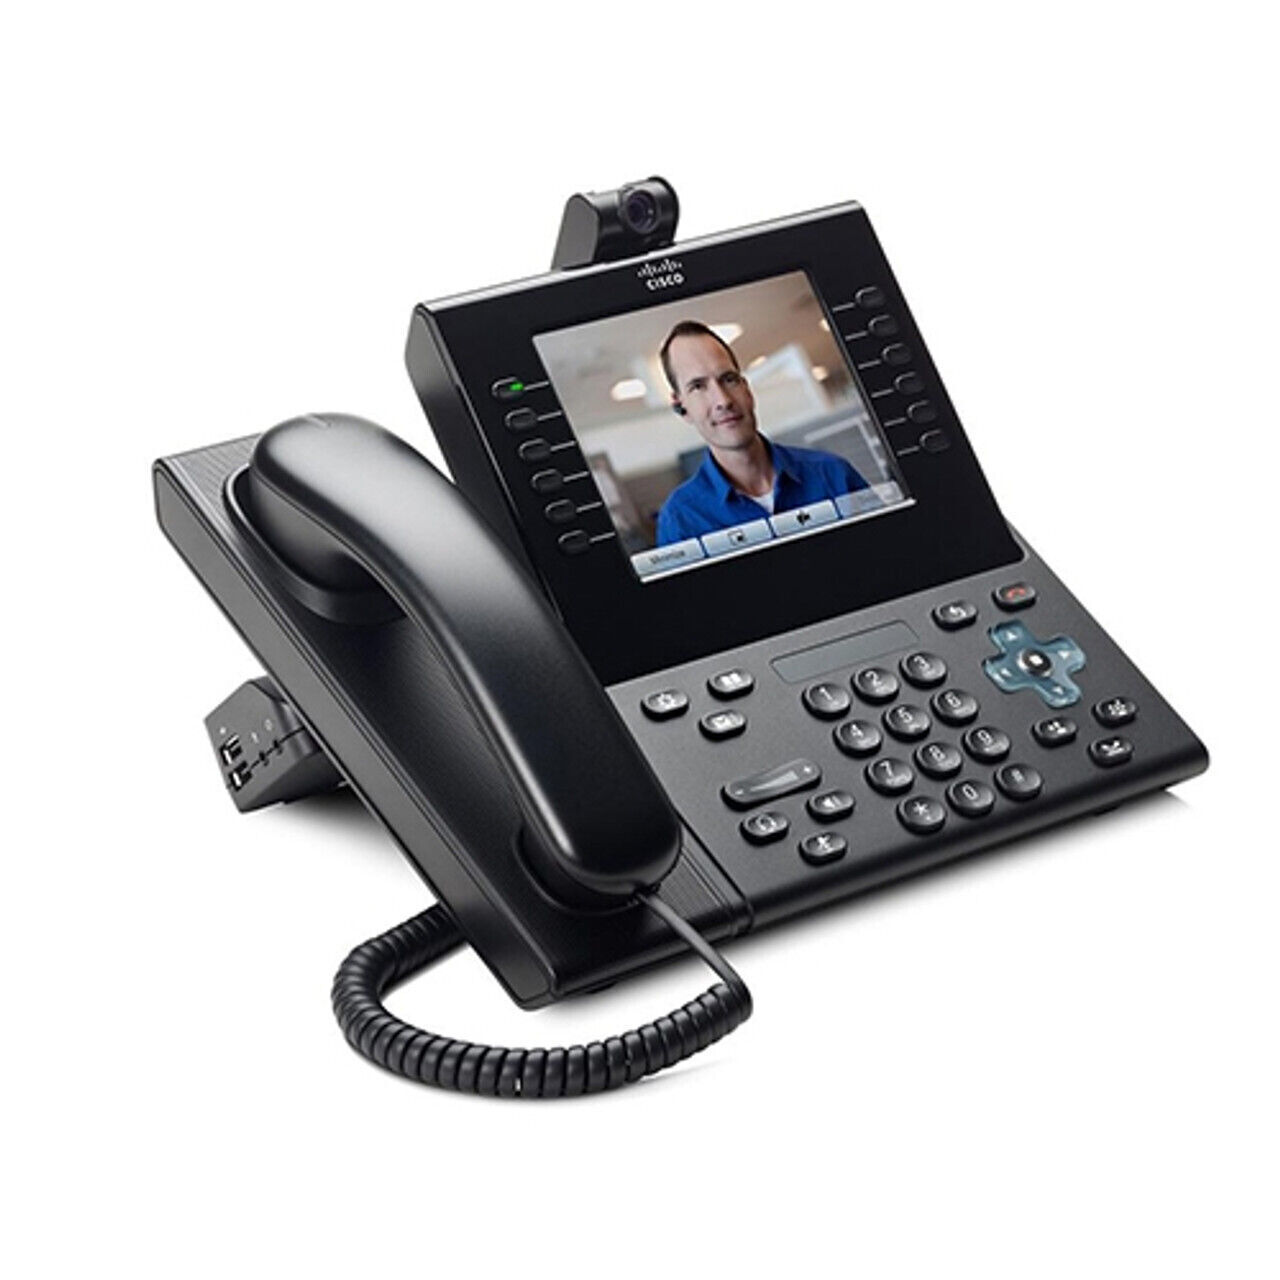 CISCO CP-9971 VoIP IP Phone Color Touchscreen Wi-Fi w/ USB Camera, Charcoal NEW